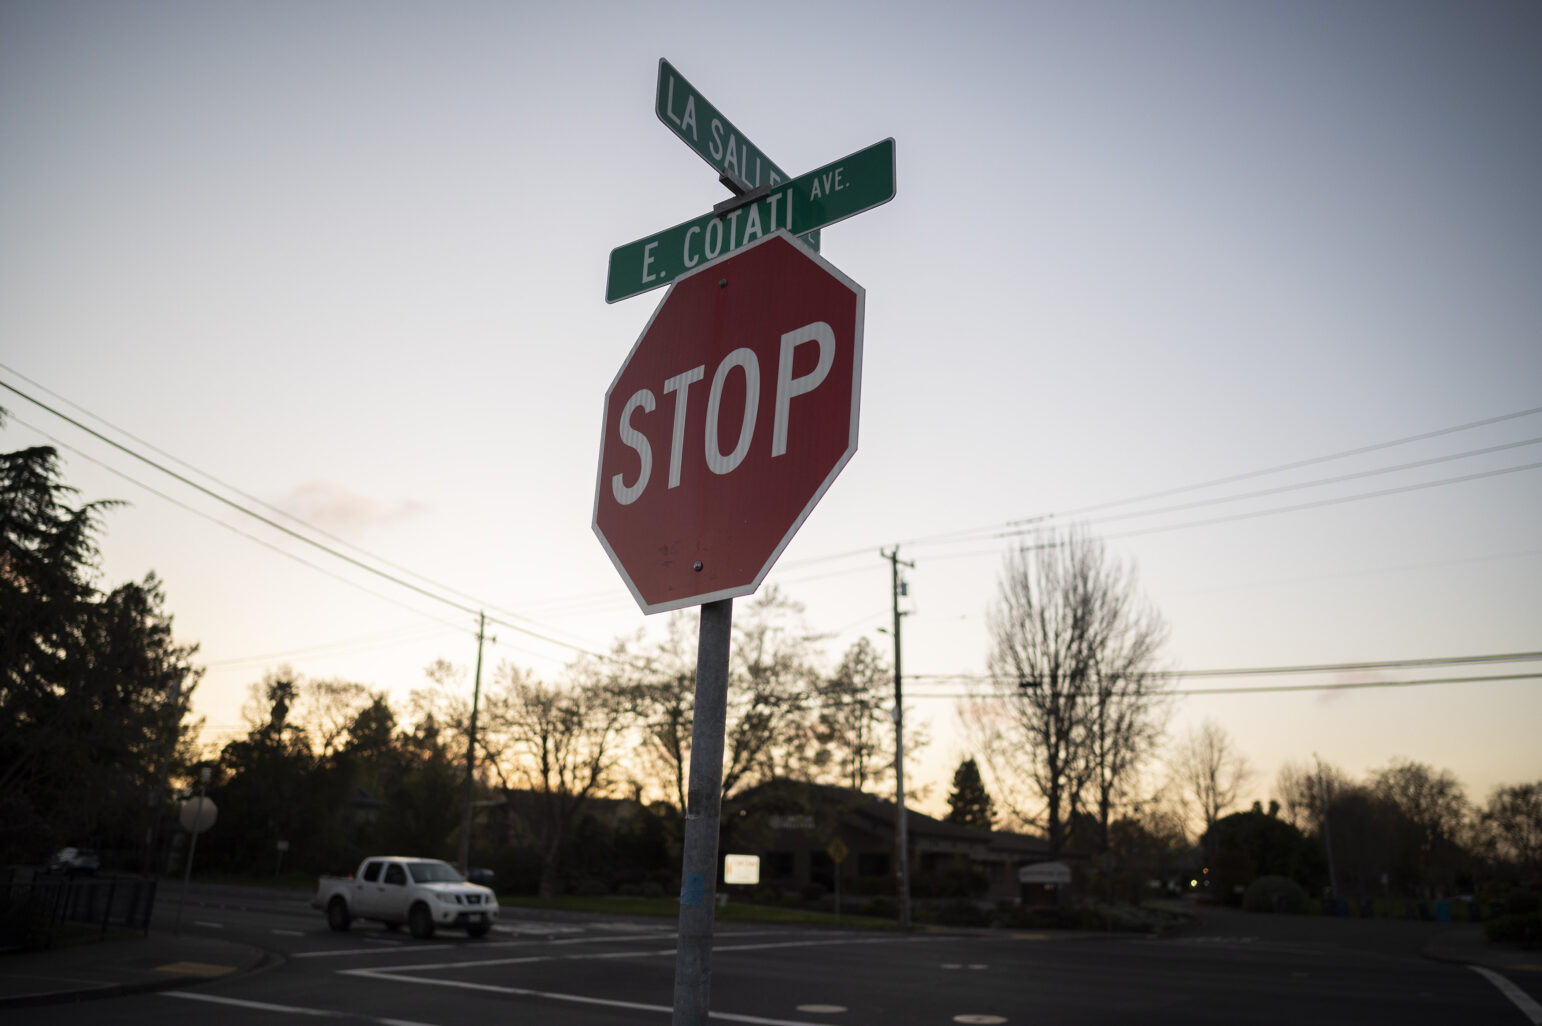 Dusk scene featuring a stop sign at the intersection of Lasalle Ave. and E. Cotati Ave. The sign is in sharp focus with a soft-focus background, including a vehicle passing by and the fading light of the sky.